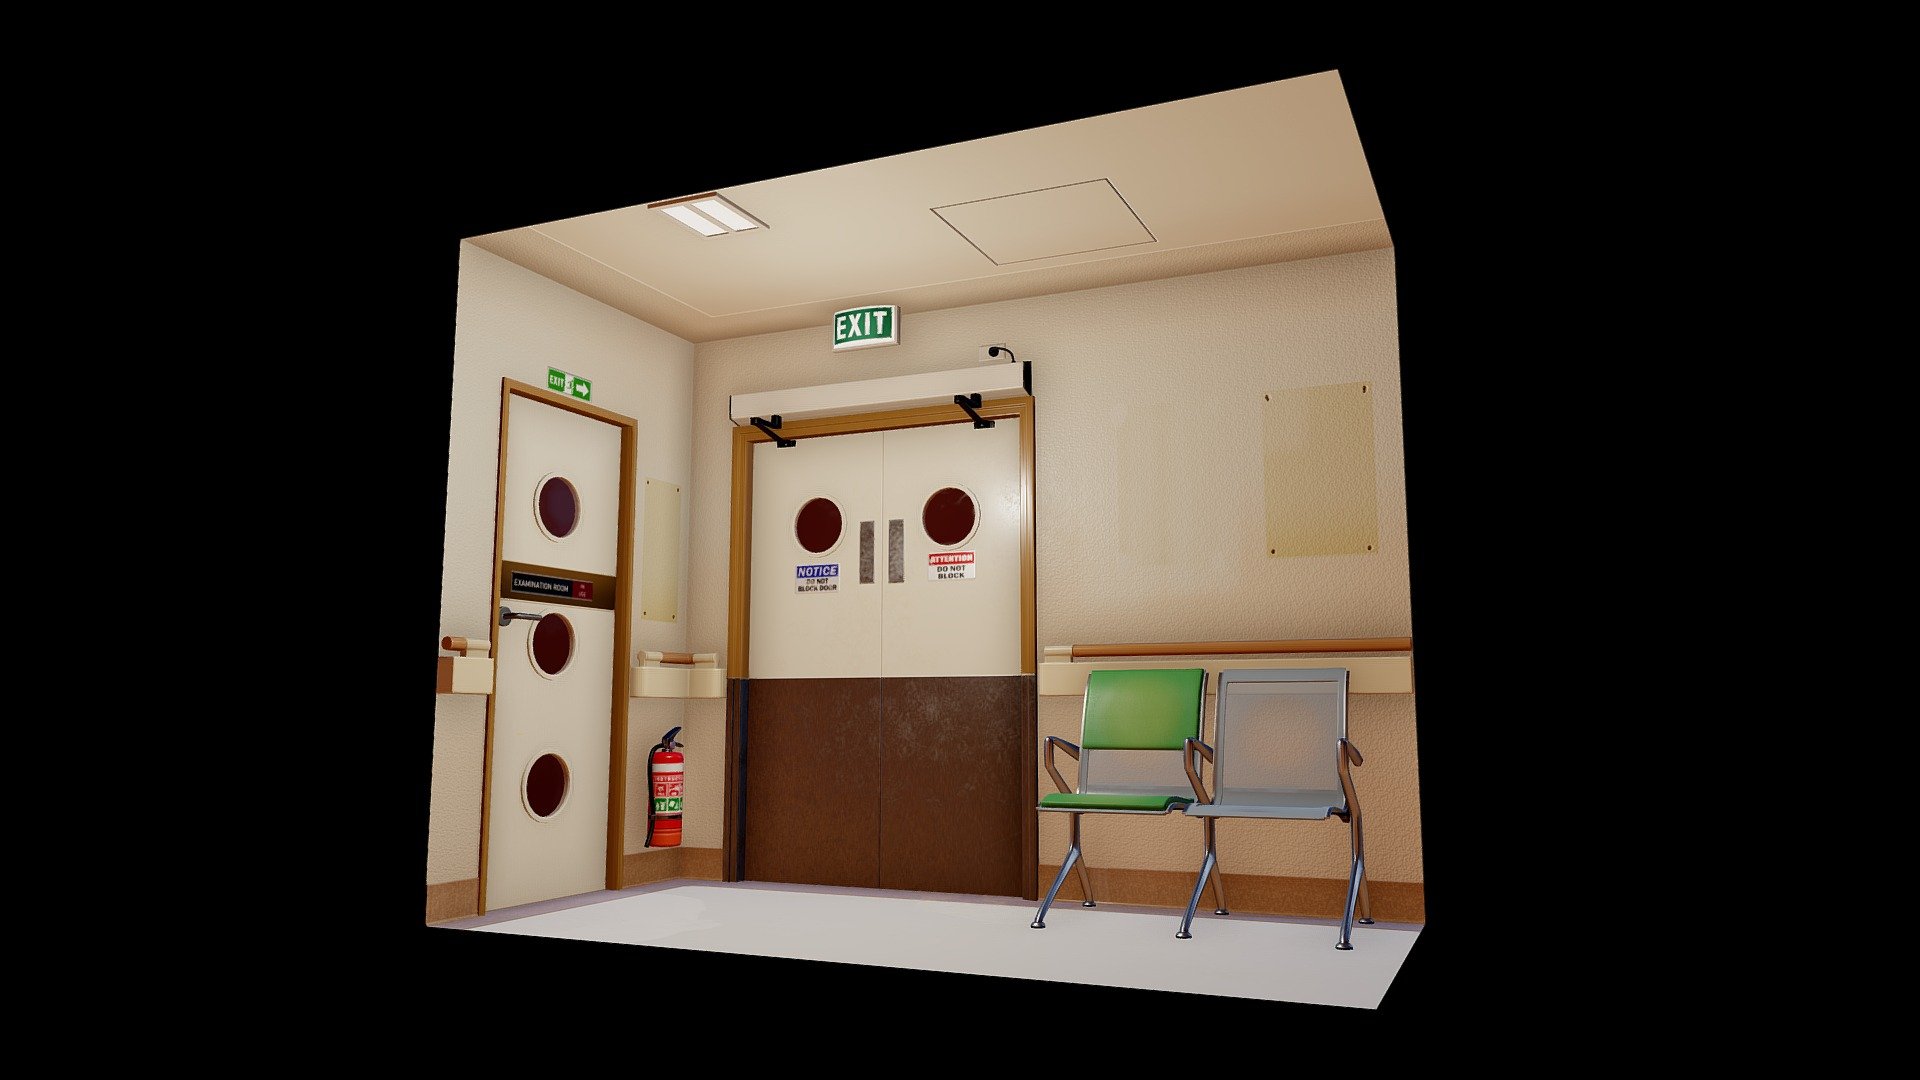 Just a small diorama of a hospital corridor I thought would be fun to make. Modelled and baked in Maya. Textured in Substance Painter 3d model